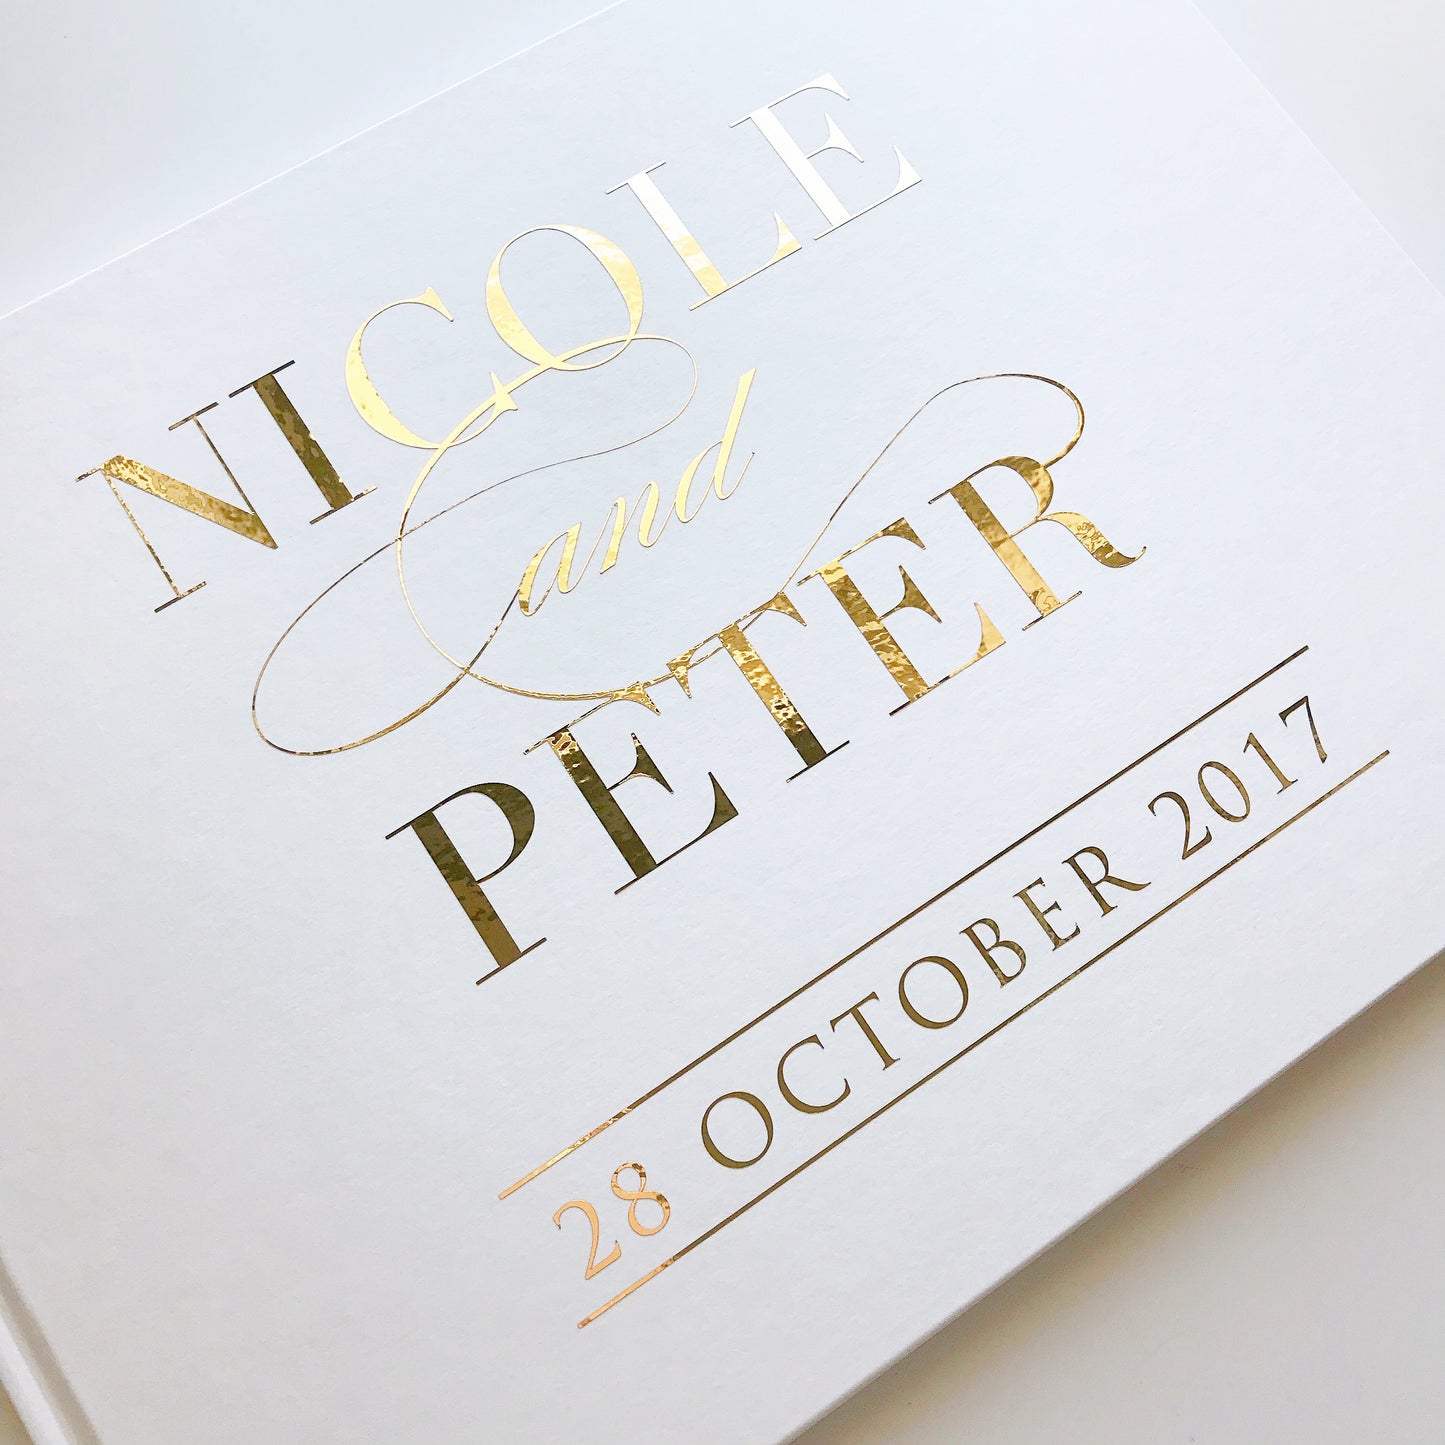 Hardcover A4 Landscape Personalised guest book 